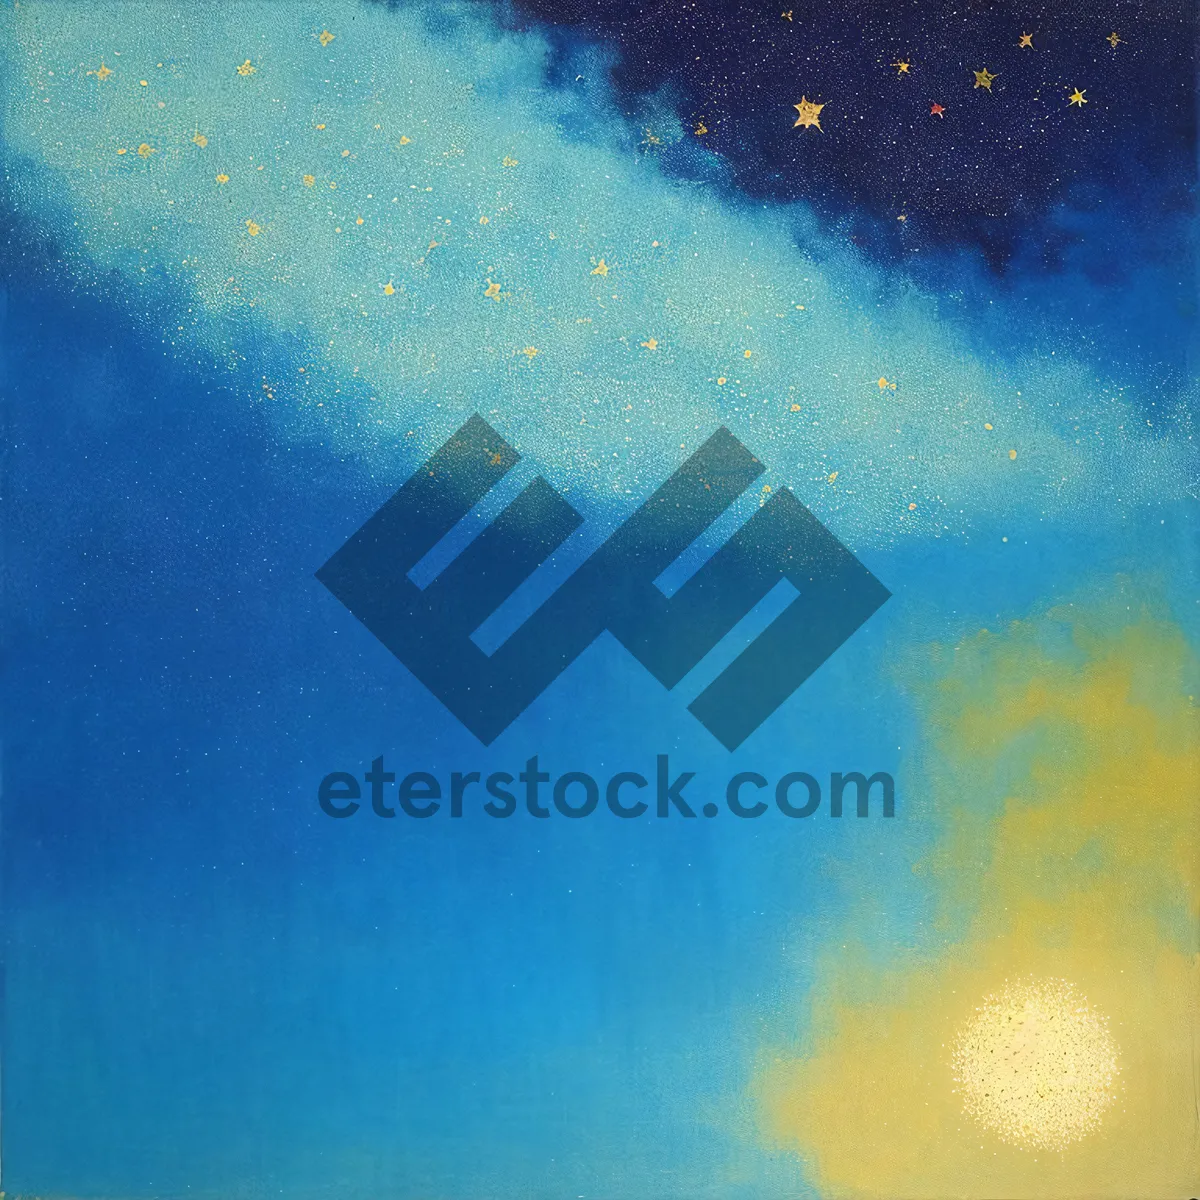 Picture of Starry Night Sky: A Celestial Dream